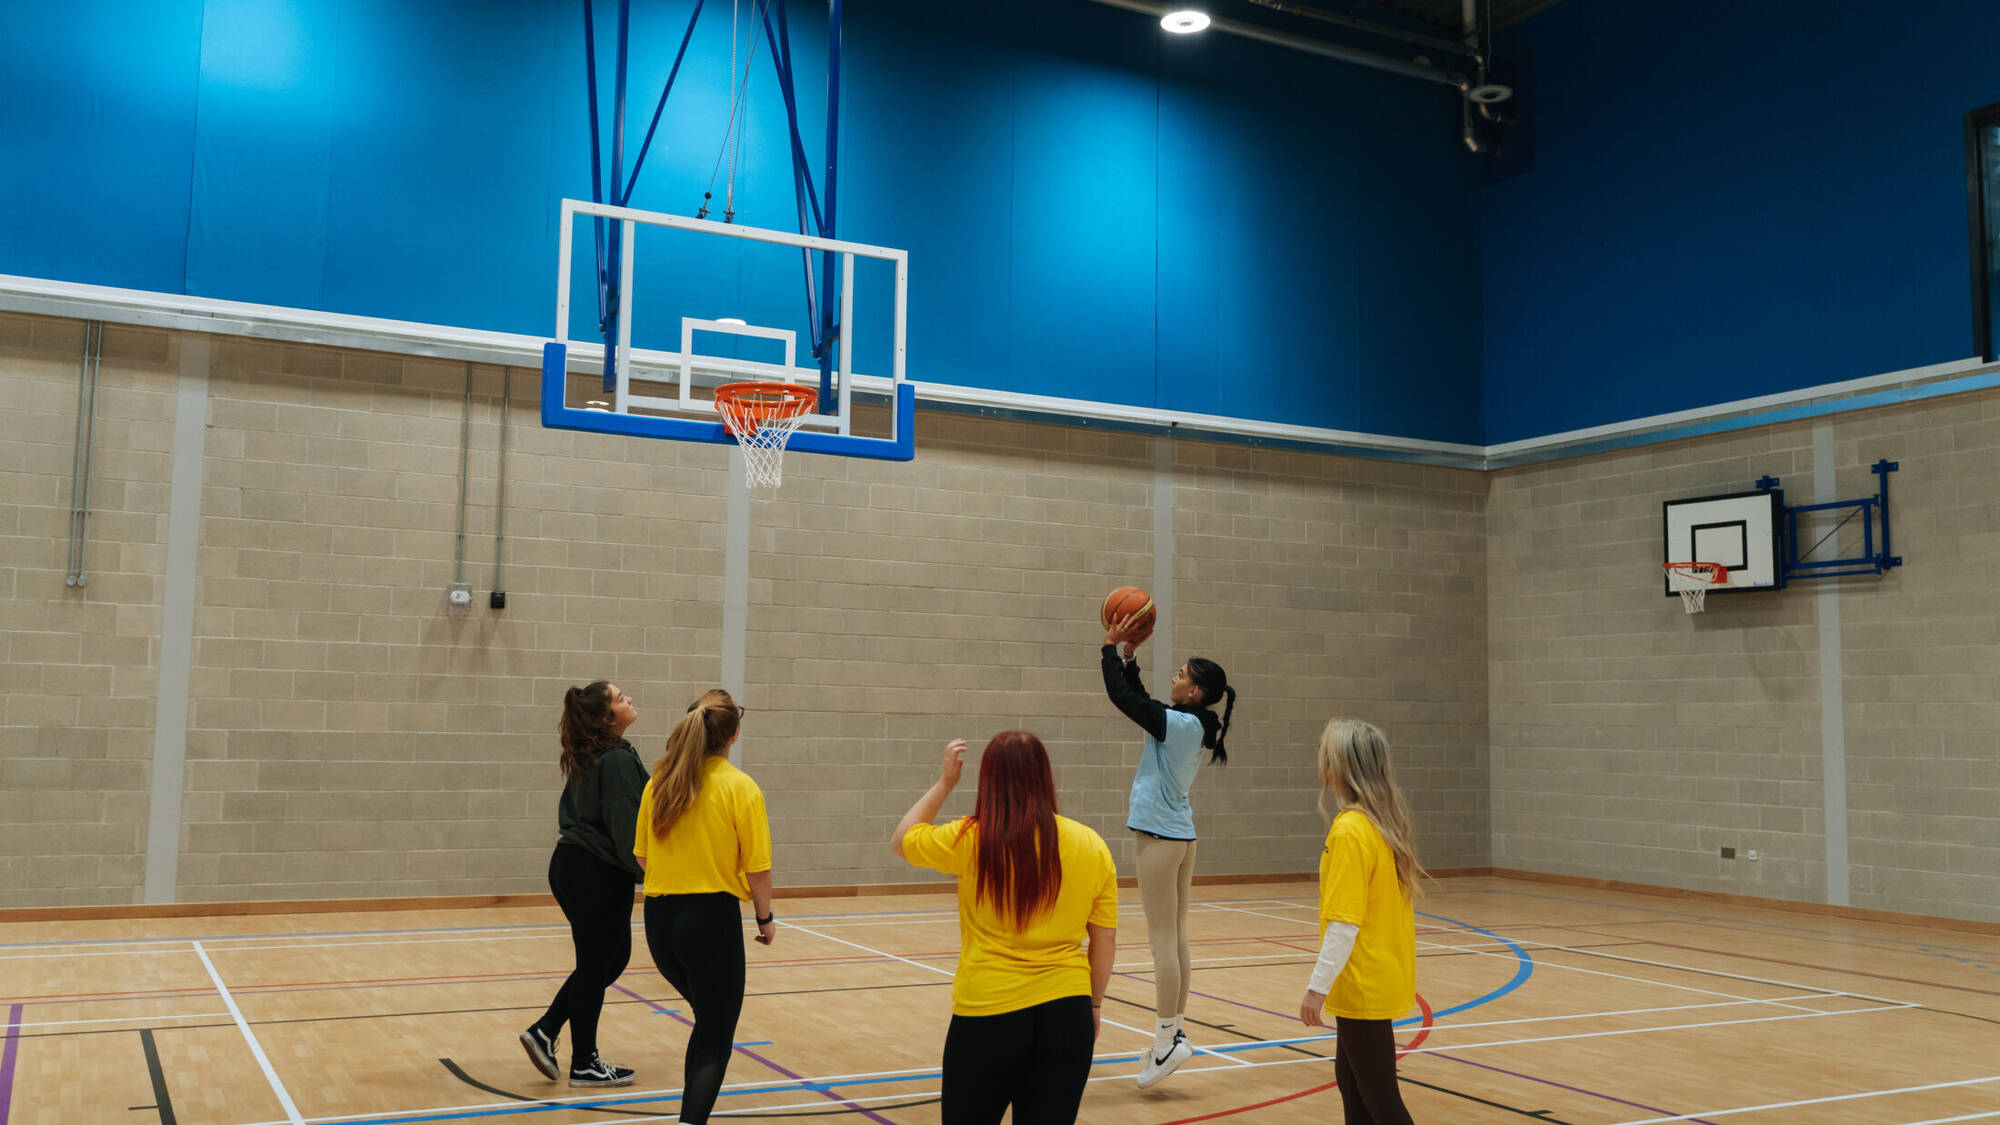 Game of netball in the sports hall